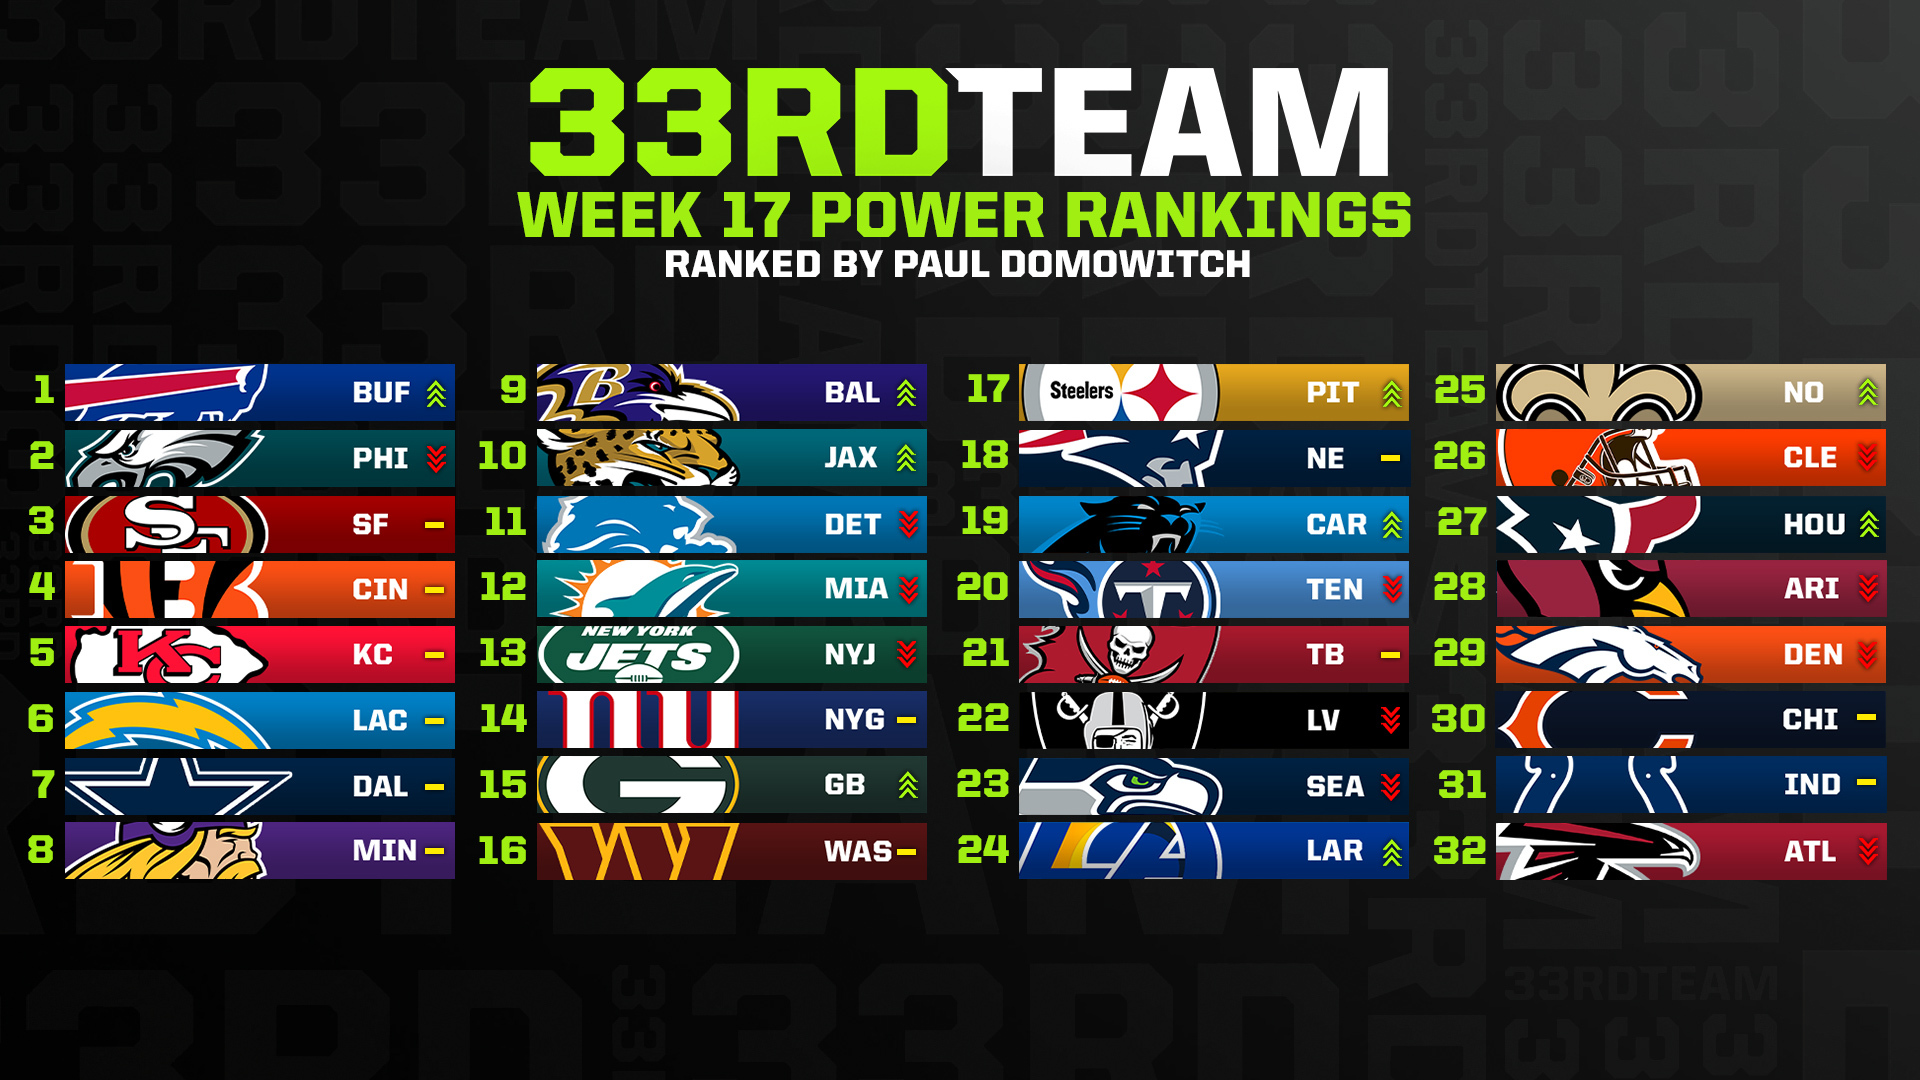 NFL Power Rankings, Week 11: Eagles stay at No. 1 despite first